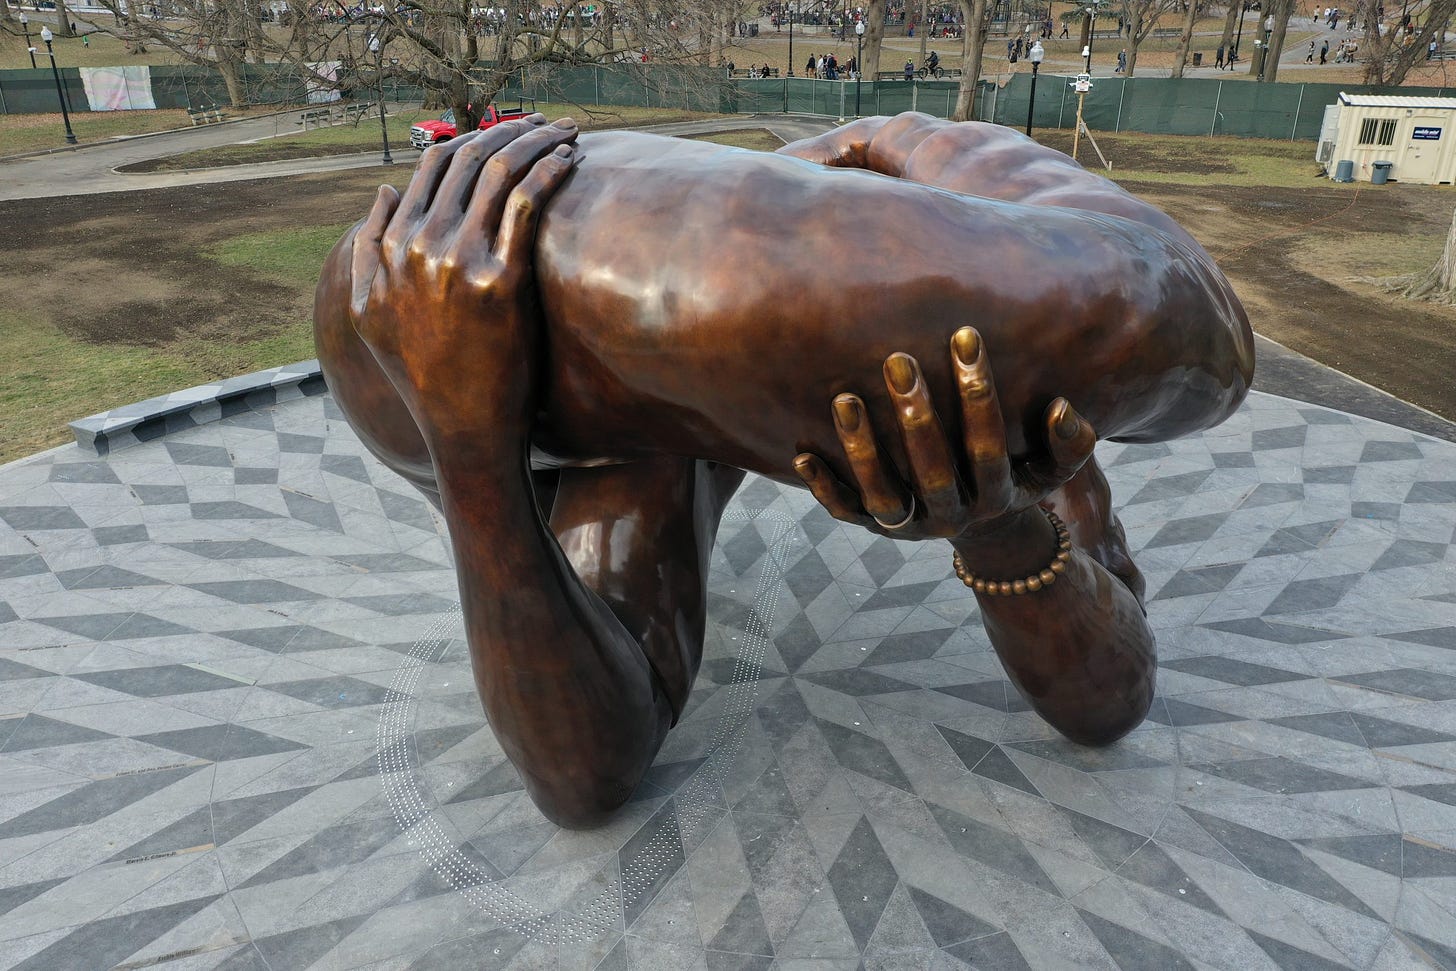 Standing Two Stories Tall, a Hank Willis Thomas Sculpture Honoring Martin  Luther King Jr. Is Unveiled on Boston Common | Artnet News